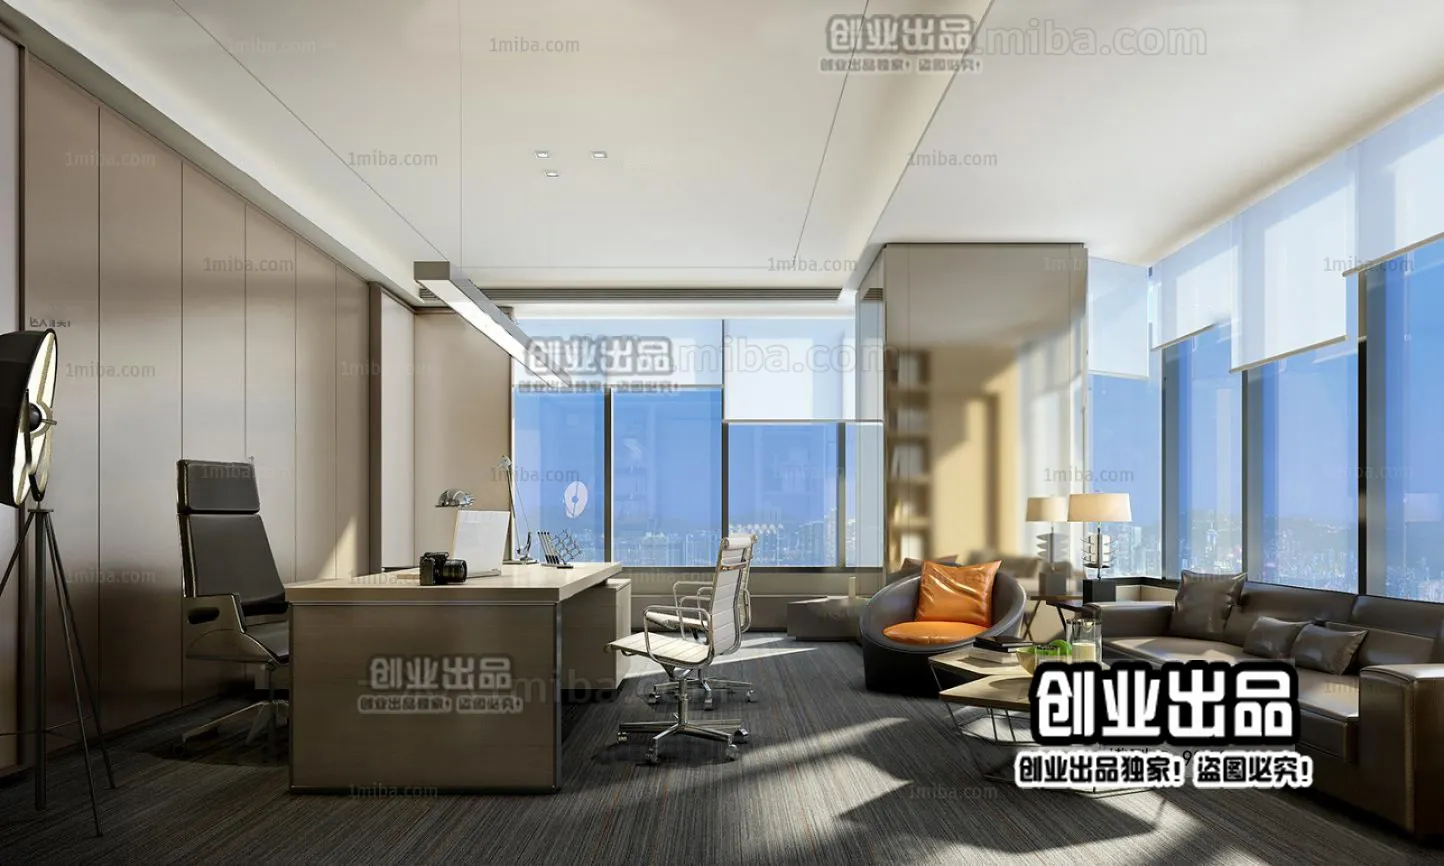 3D OFFICE INTERIOR (VRAY) – MANAGER ROOM 3D SCENES – 178